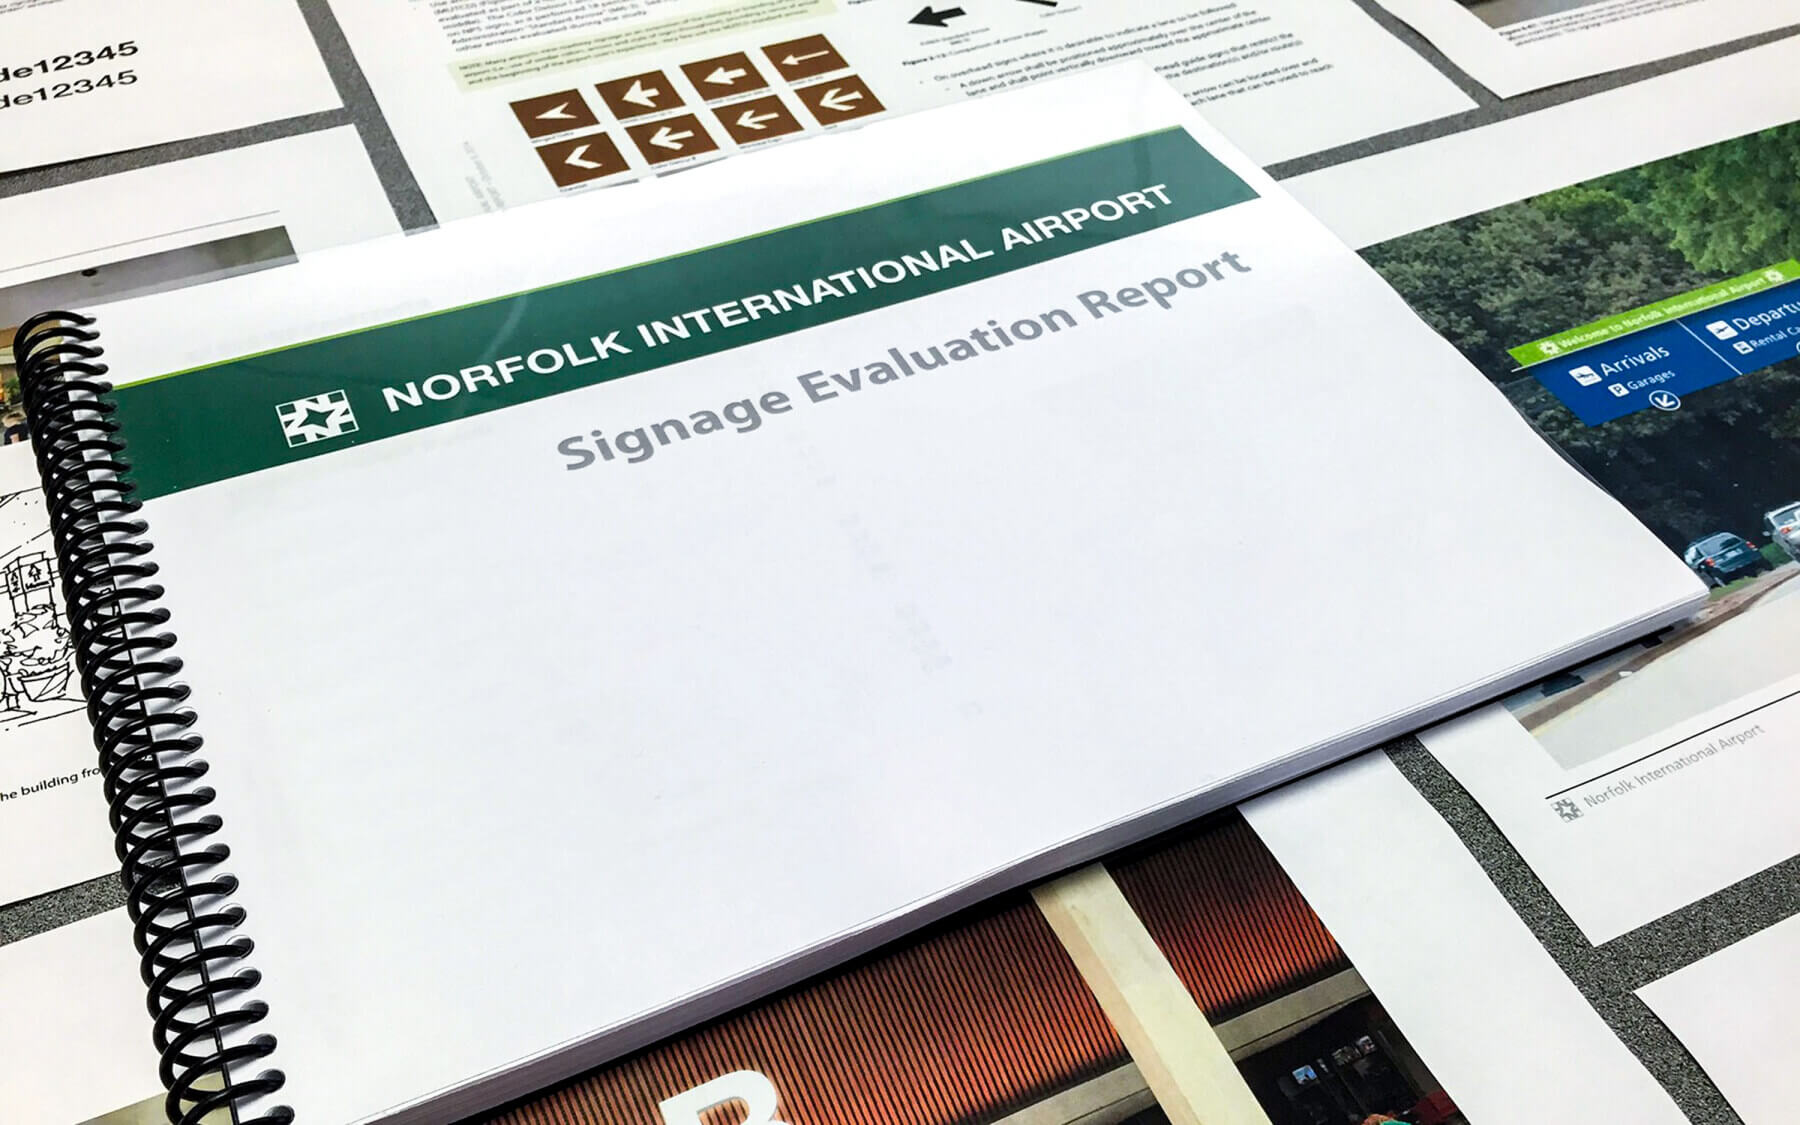 pages from the signage evaluation report for Norfolk International Airport